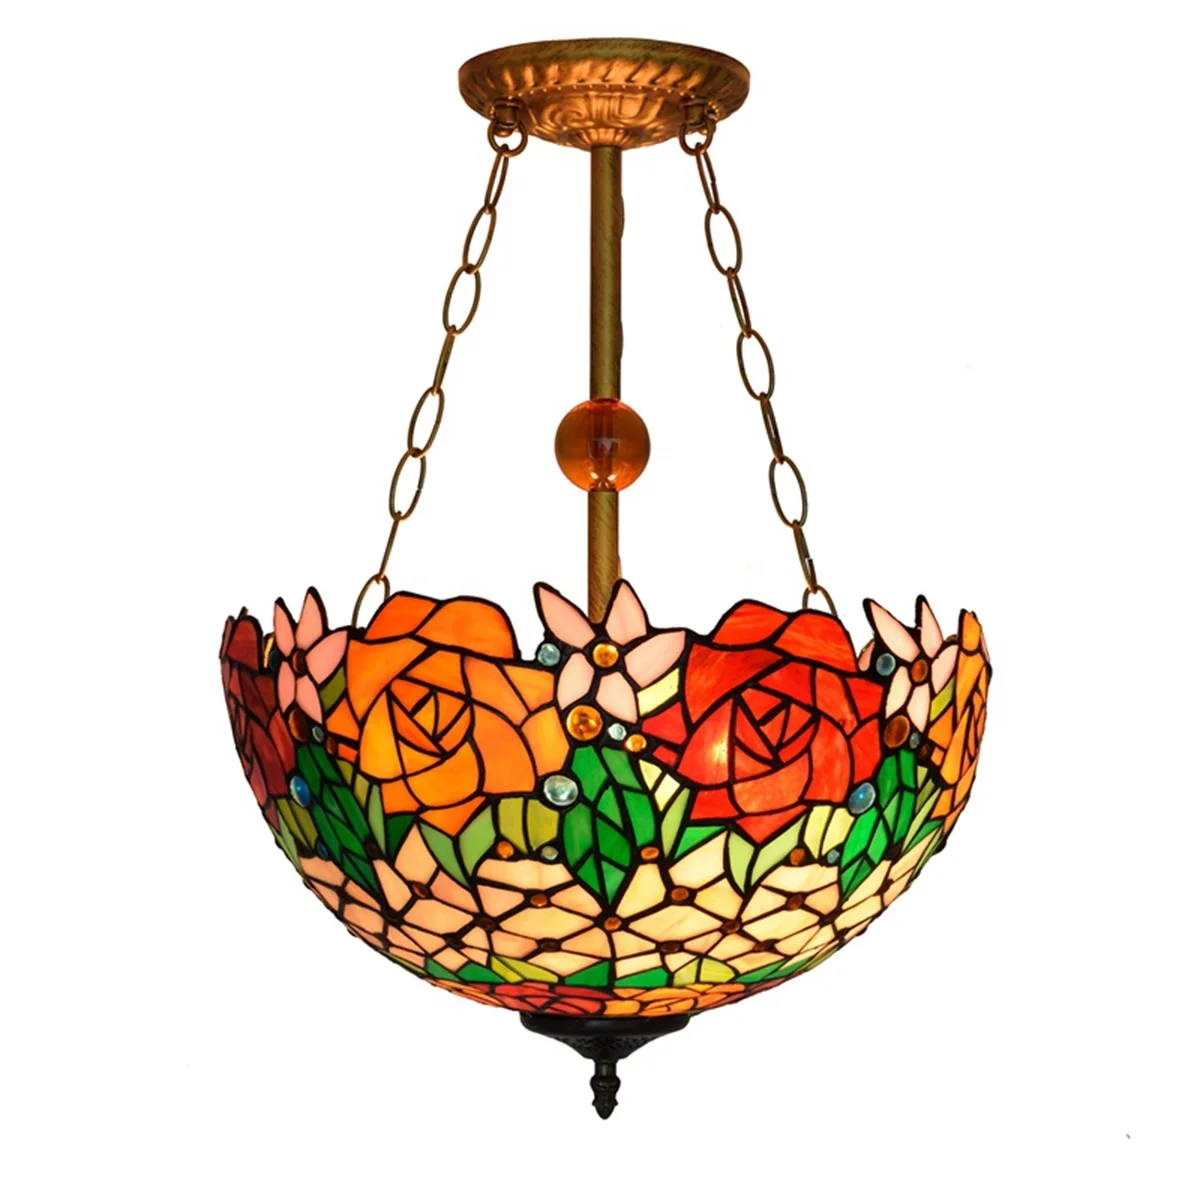 Stained glass chandelier 16 " Tiffany Gorgeous Rose Pendant Light Glass Hanging pendent lamp Dining Room Bar Art Indoor Pendant